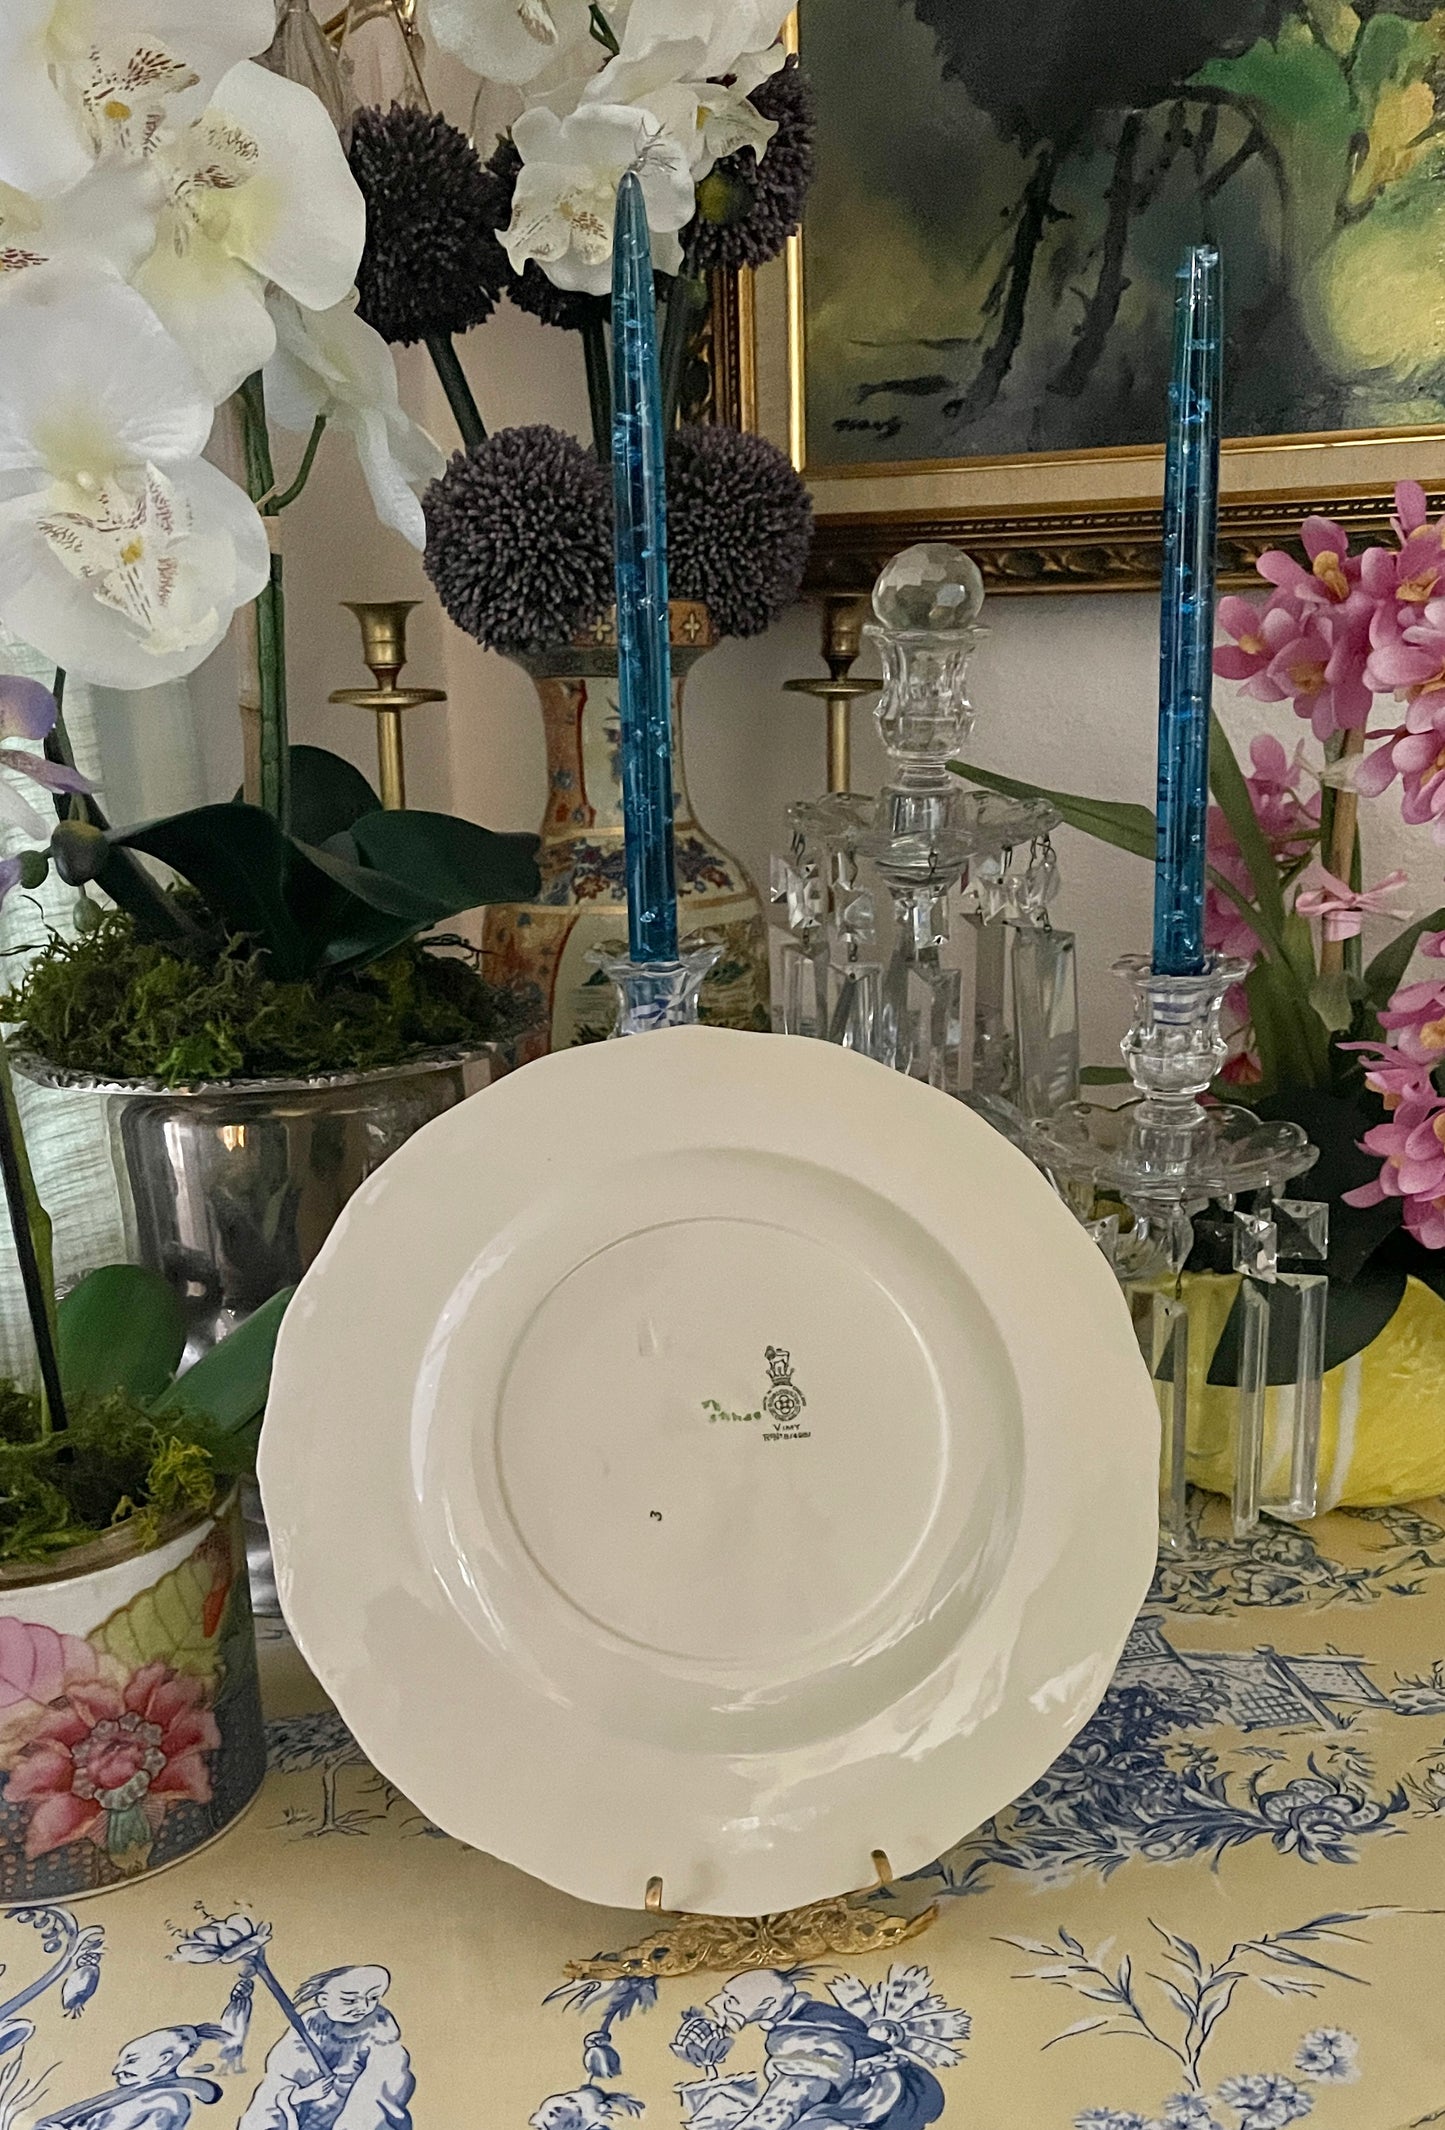 Green and White Royal Doulton Plate